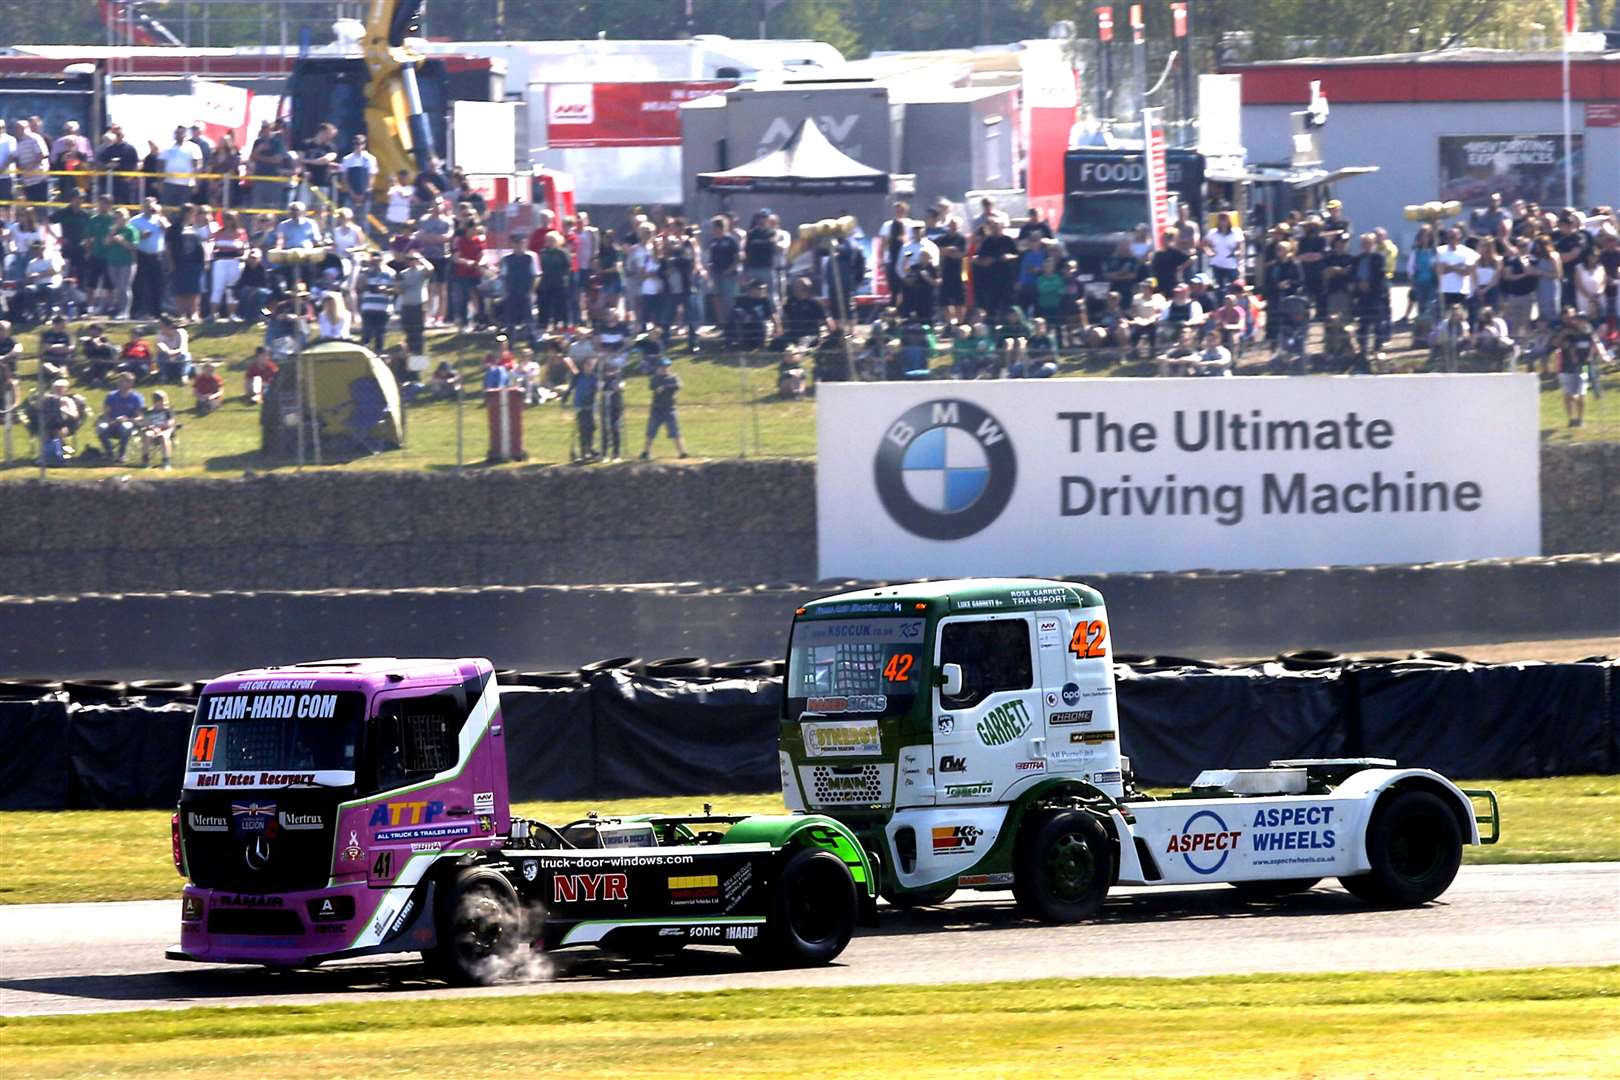 British Truck Racing Championship date moved so fans can hopefully attend at Brands Hatch Picture: Simon Hildrew